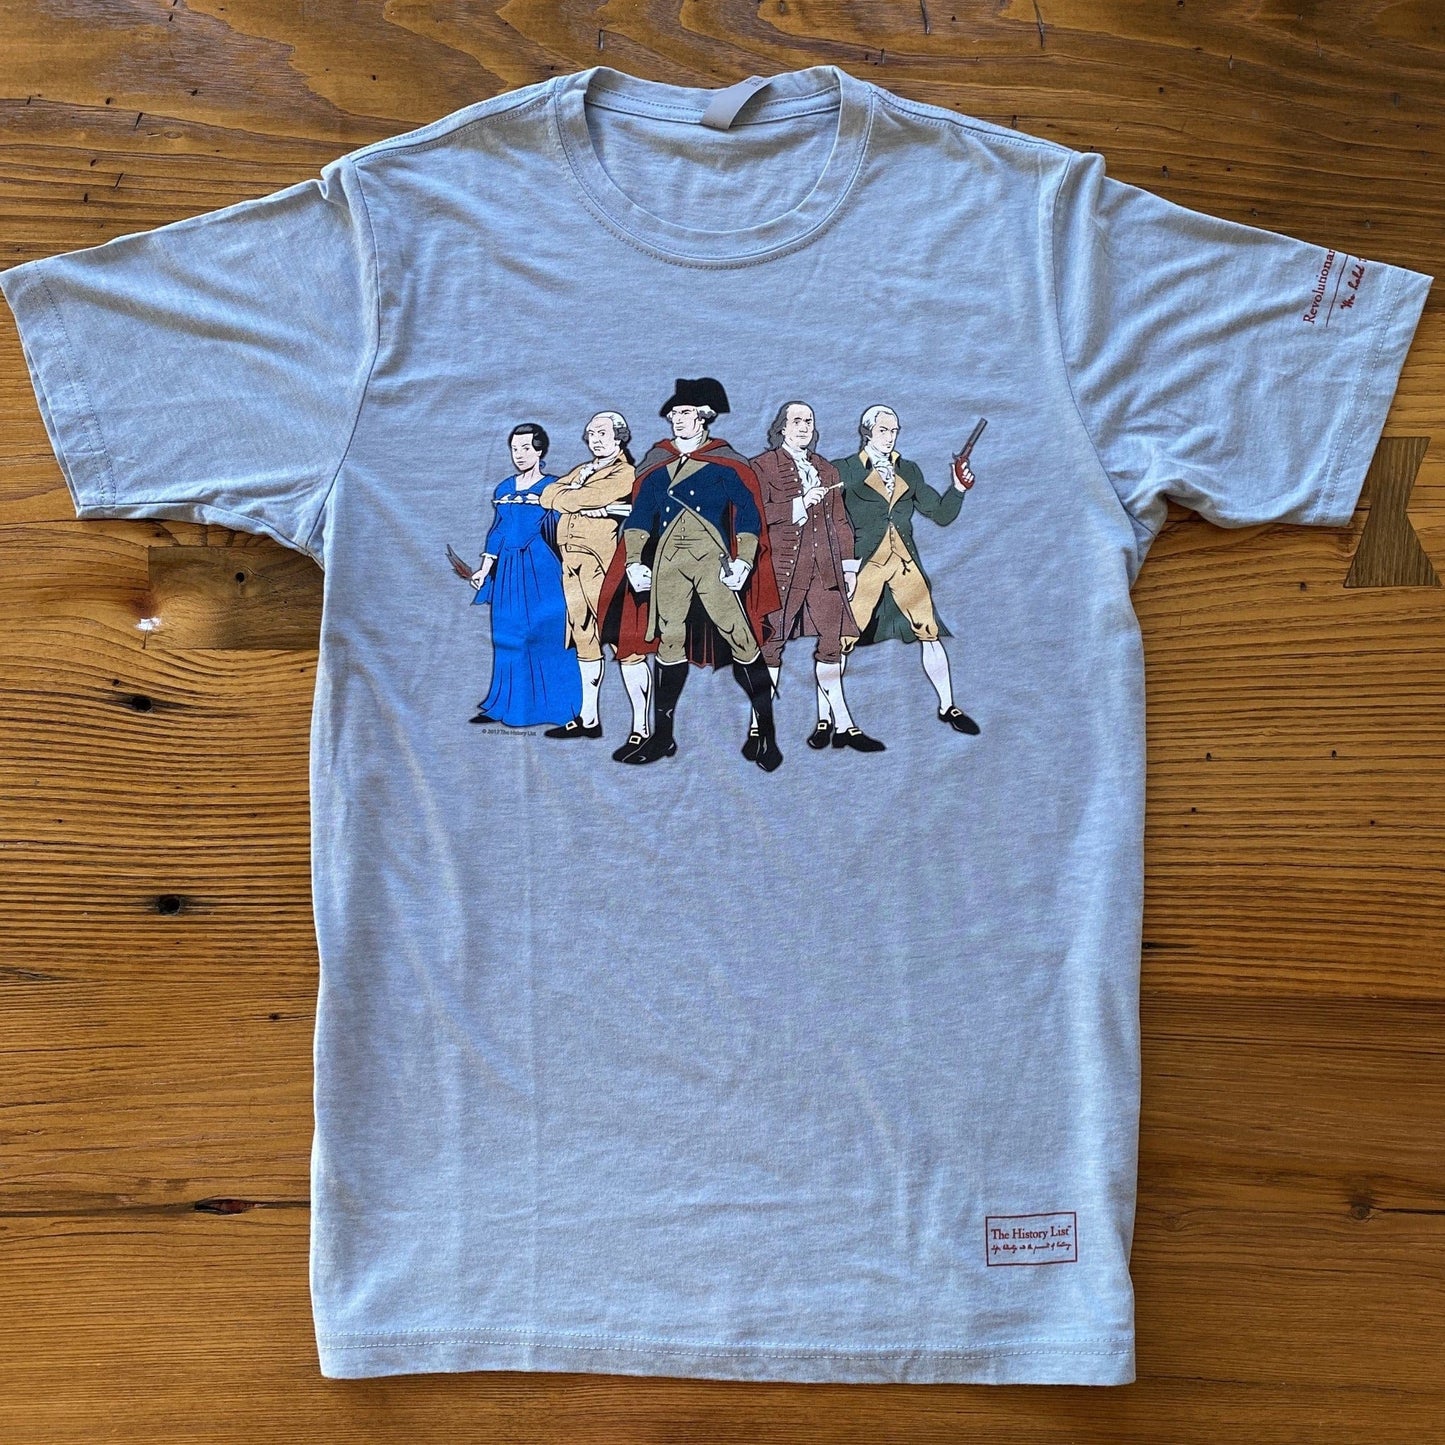 "Revolutionary Superheroes" with George Washington T-Shirt from The History List Store